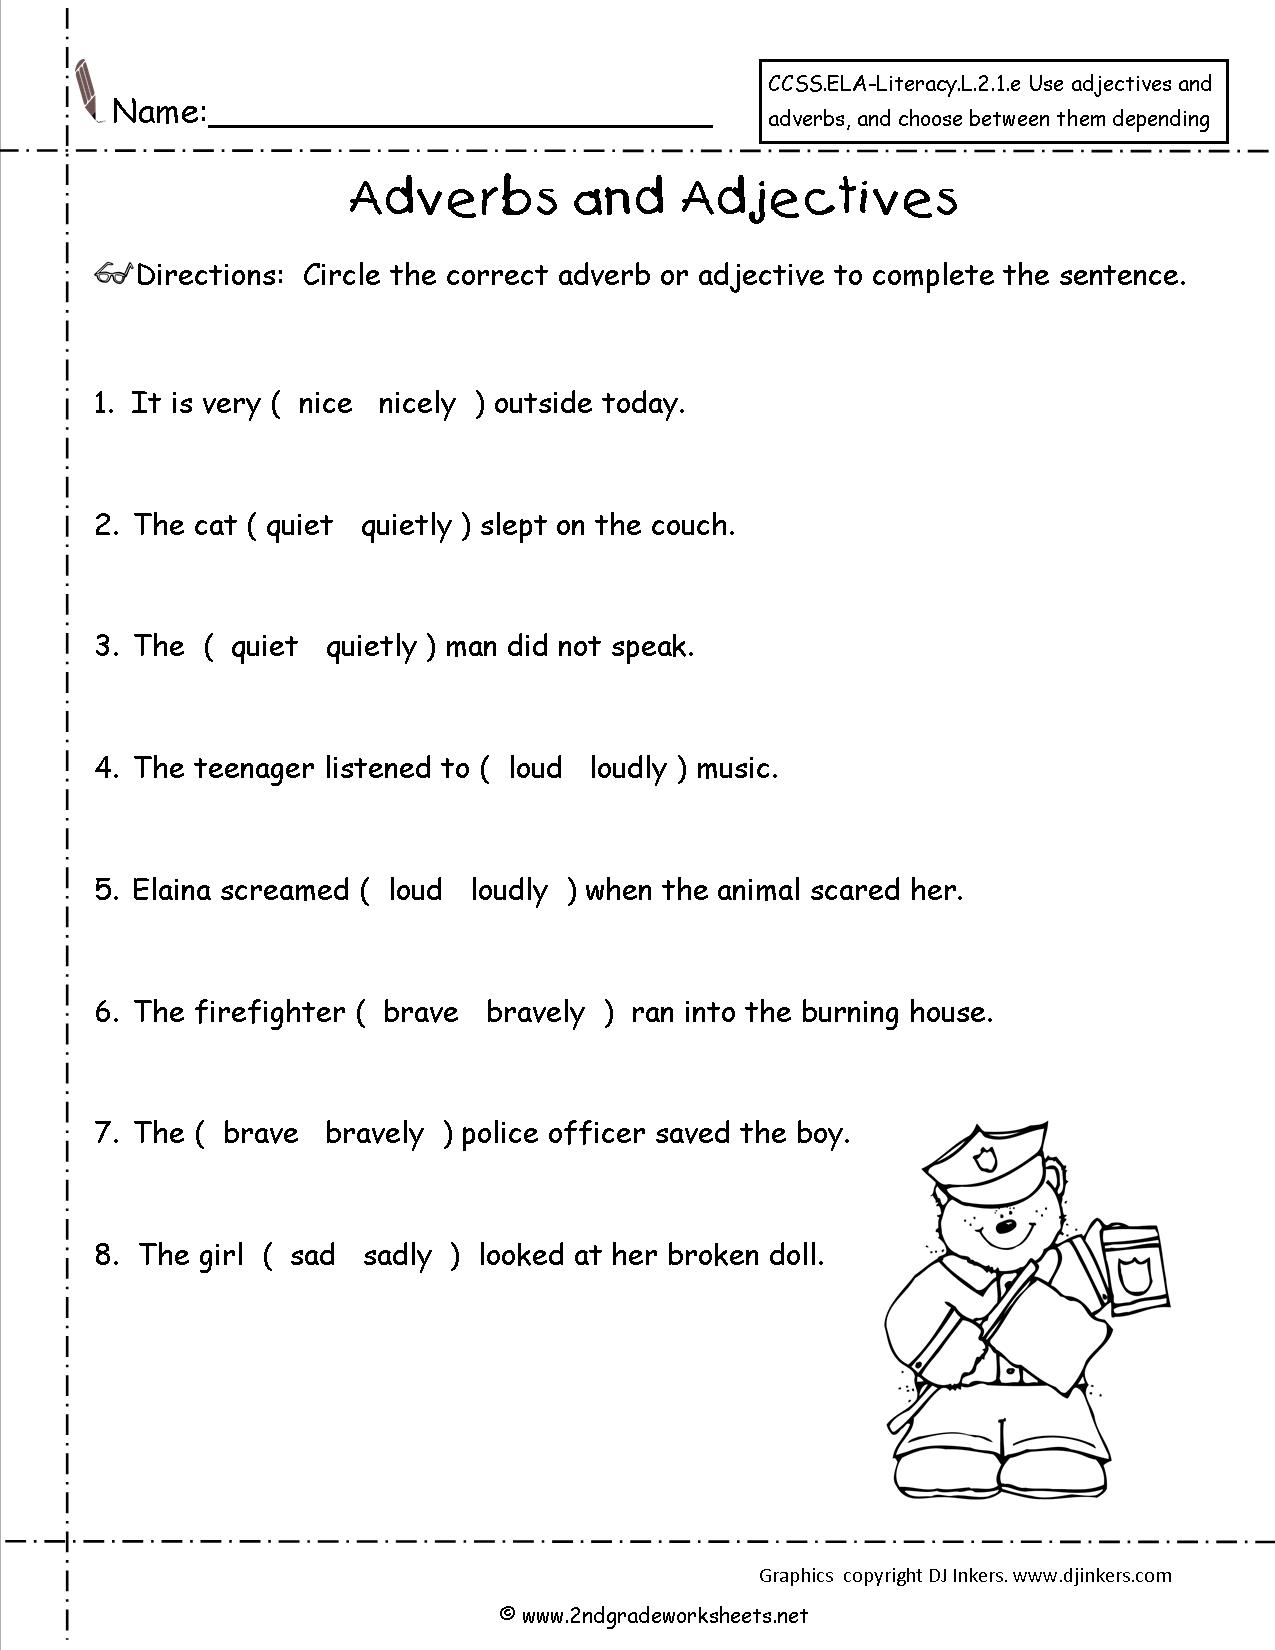 Adjectives and Adverbs Worksheet Grade 2 Image